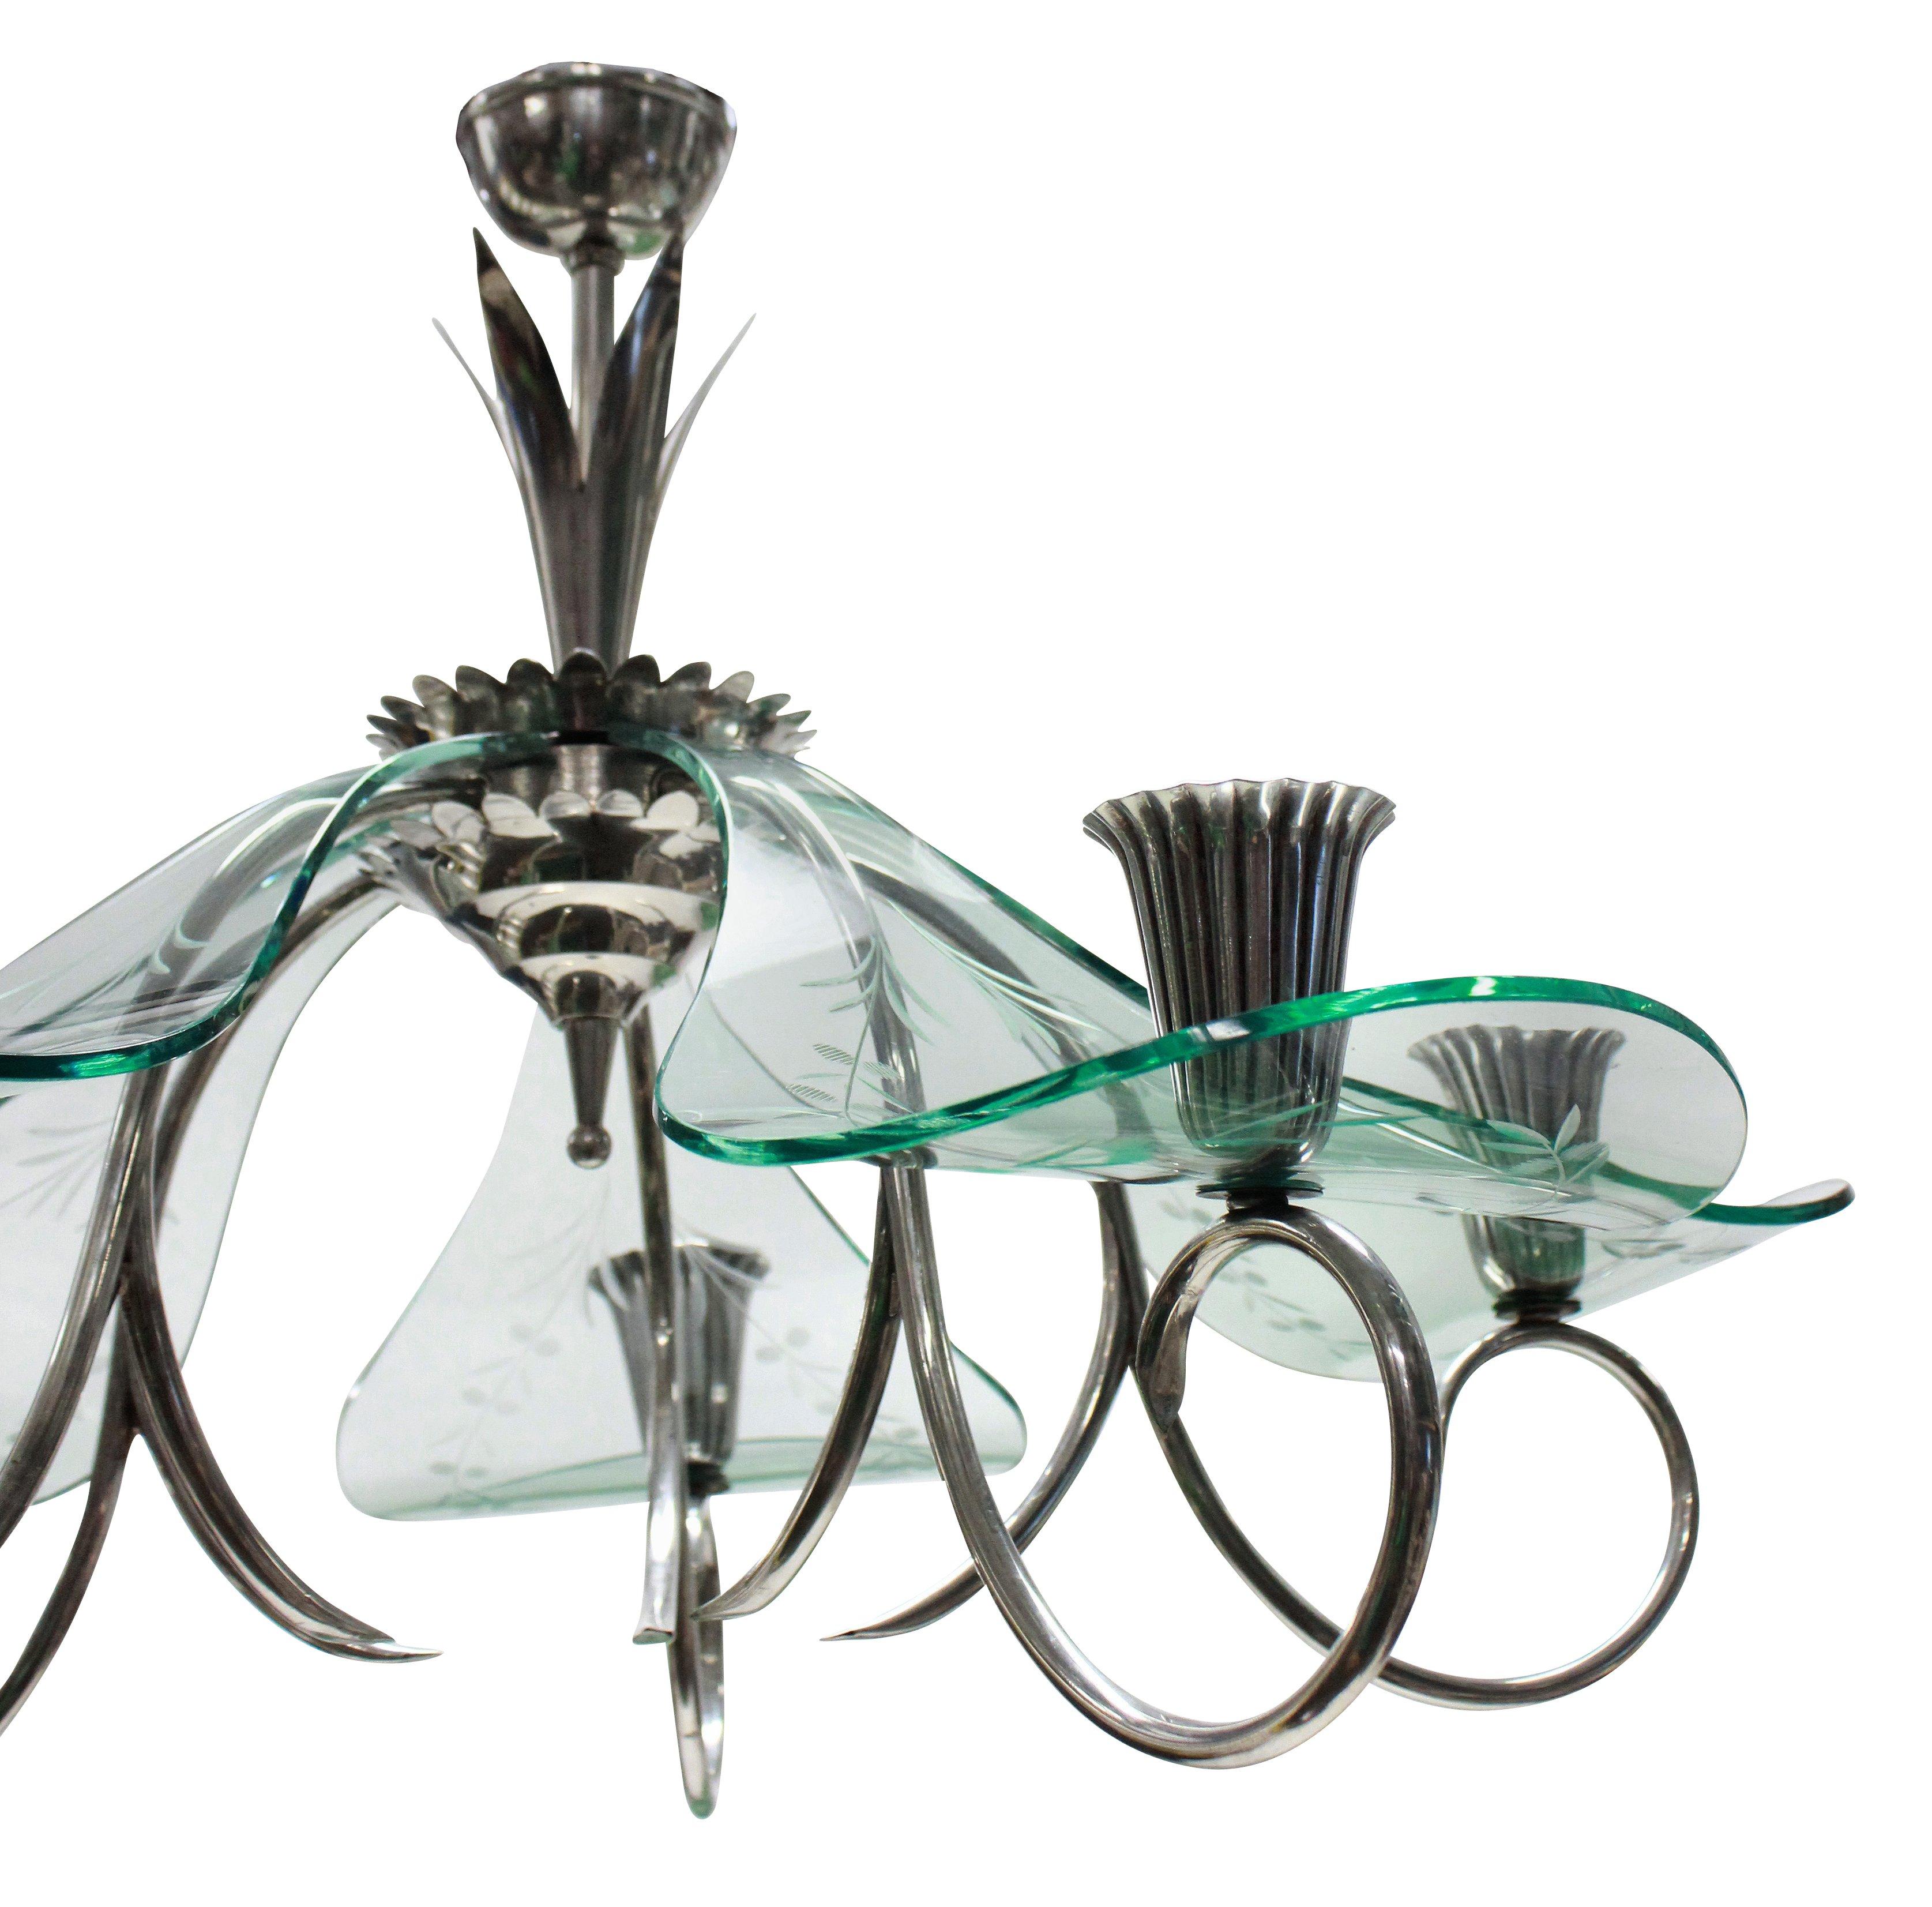 An Italian chandelier of unusual florid design, in silver plate with curved glass 'petals'.

